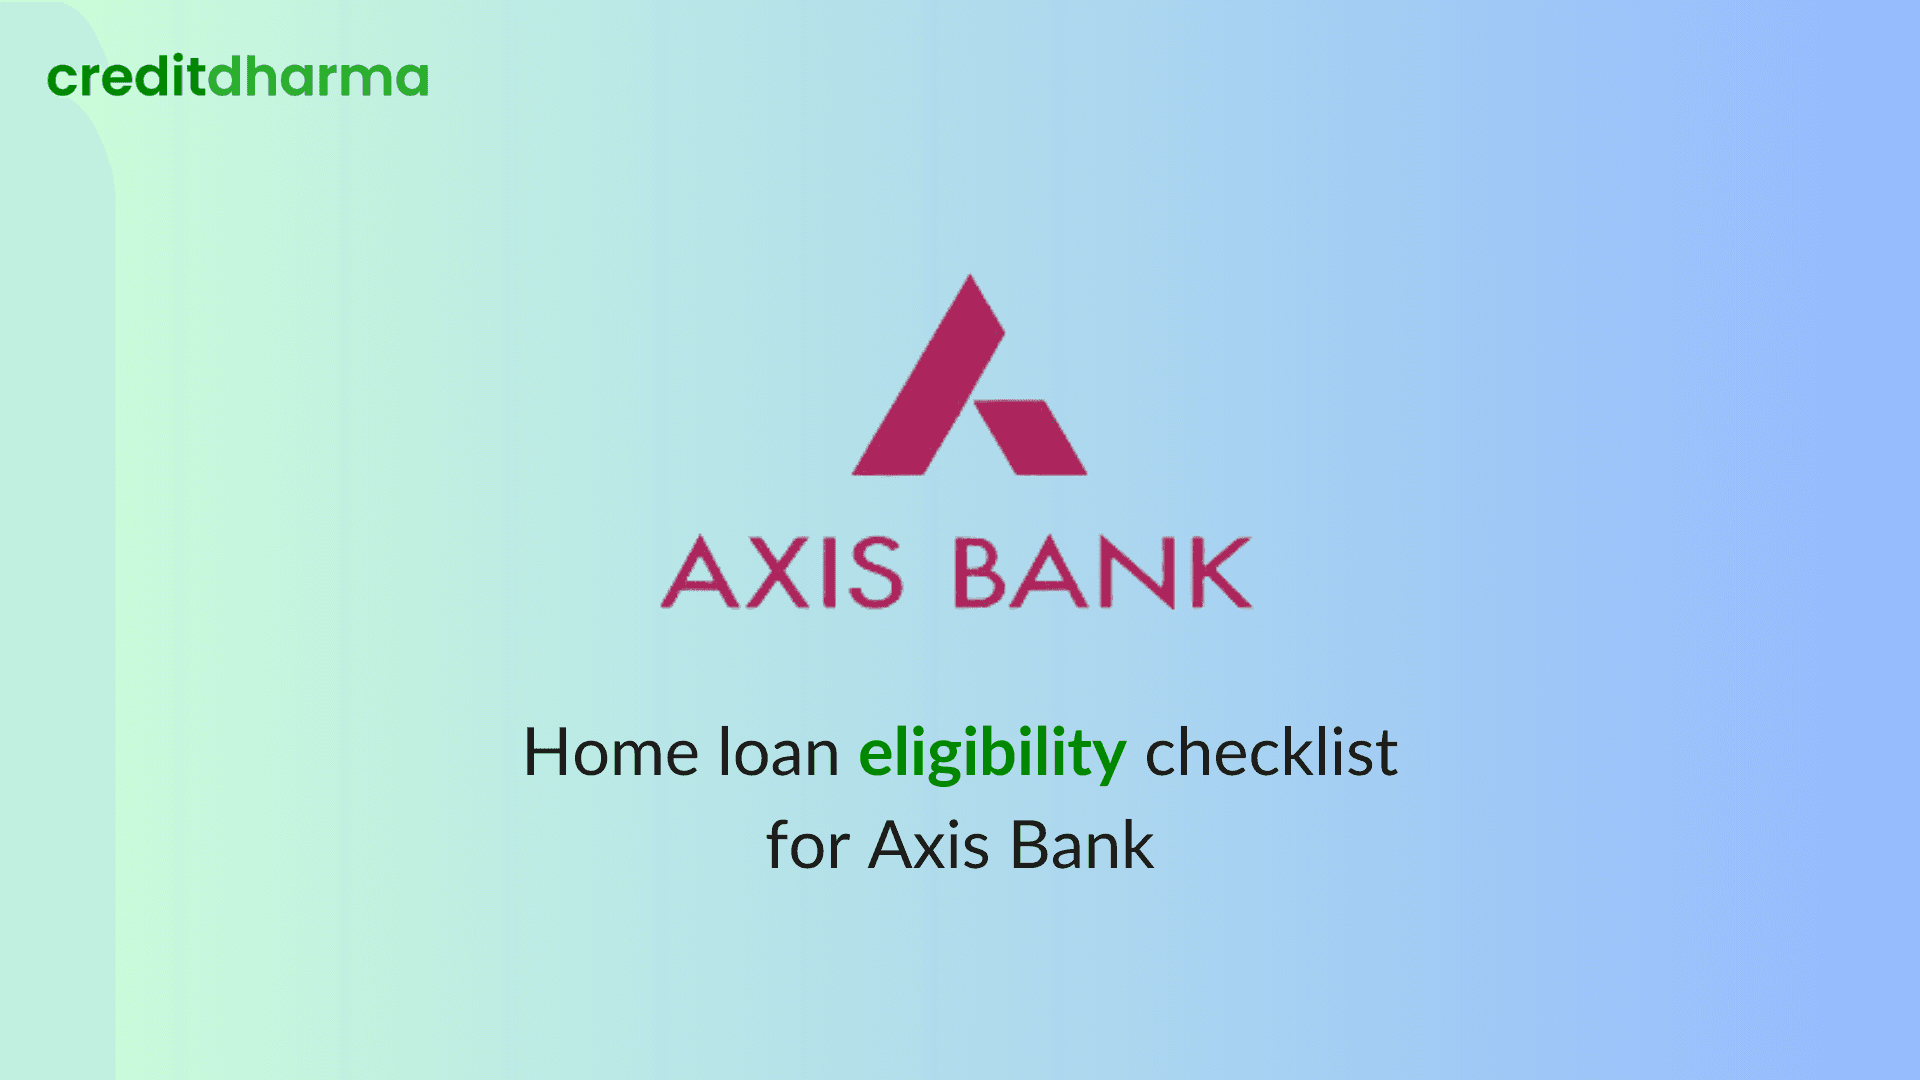 Cover Image for Home loan eligibility checklist for Axis Bank